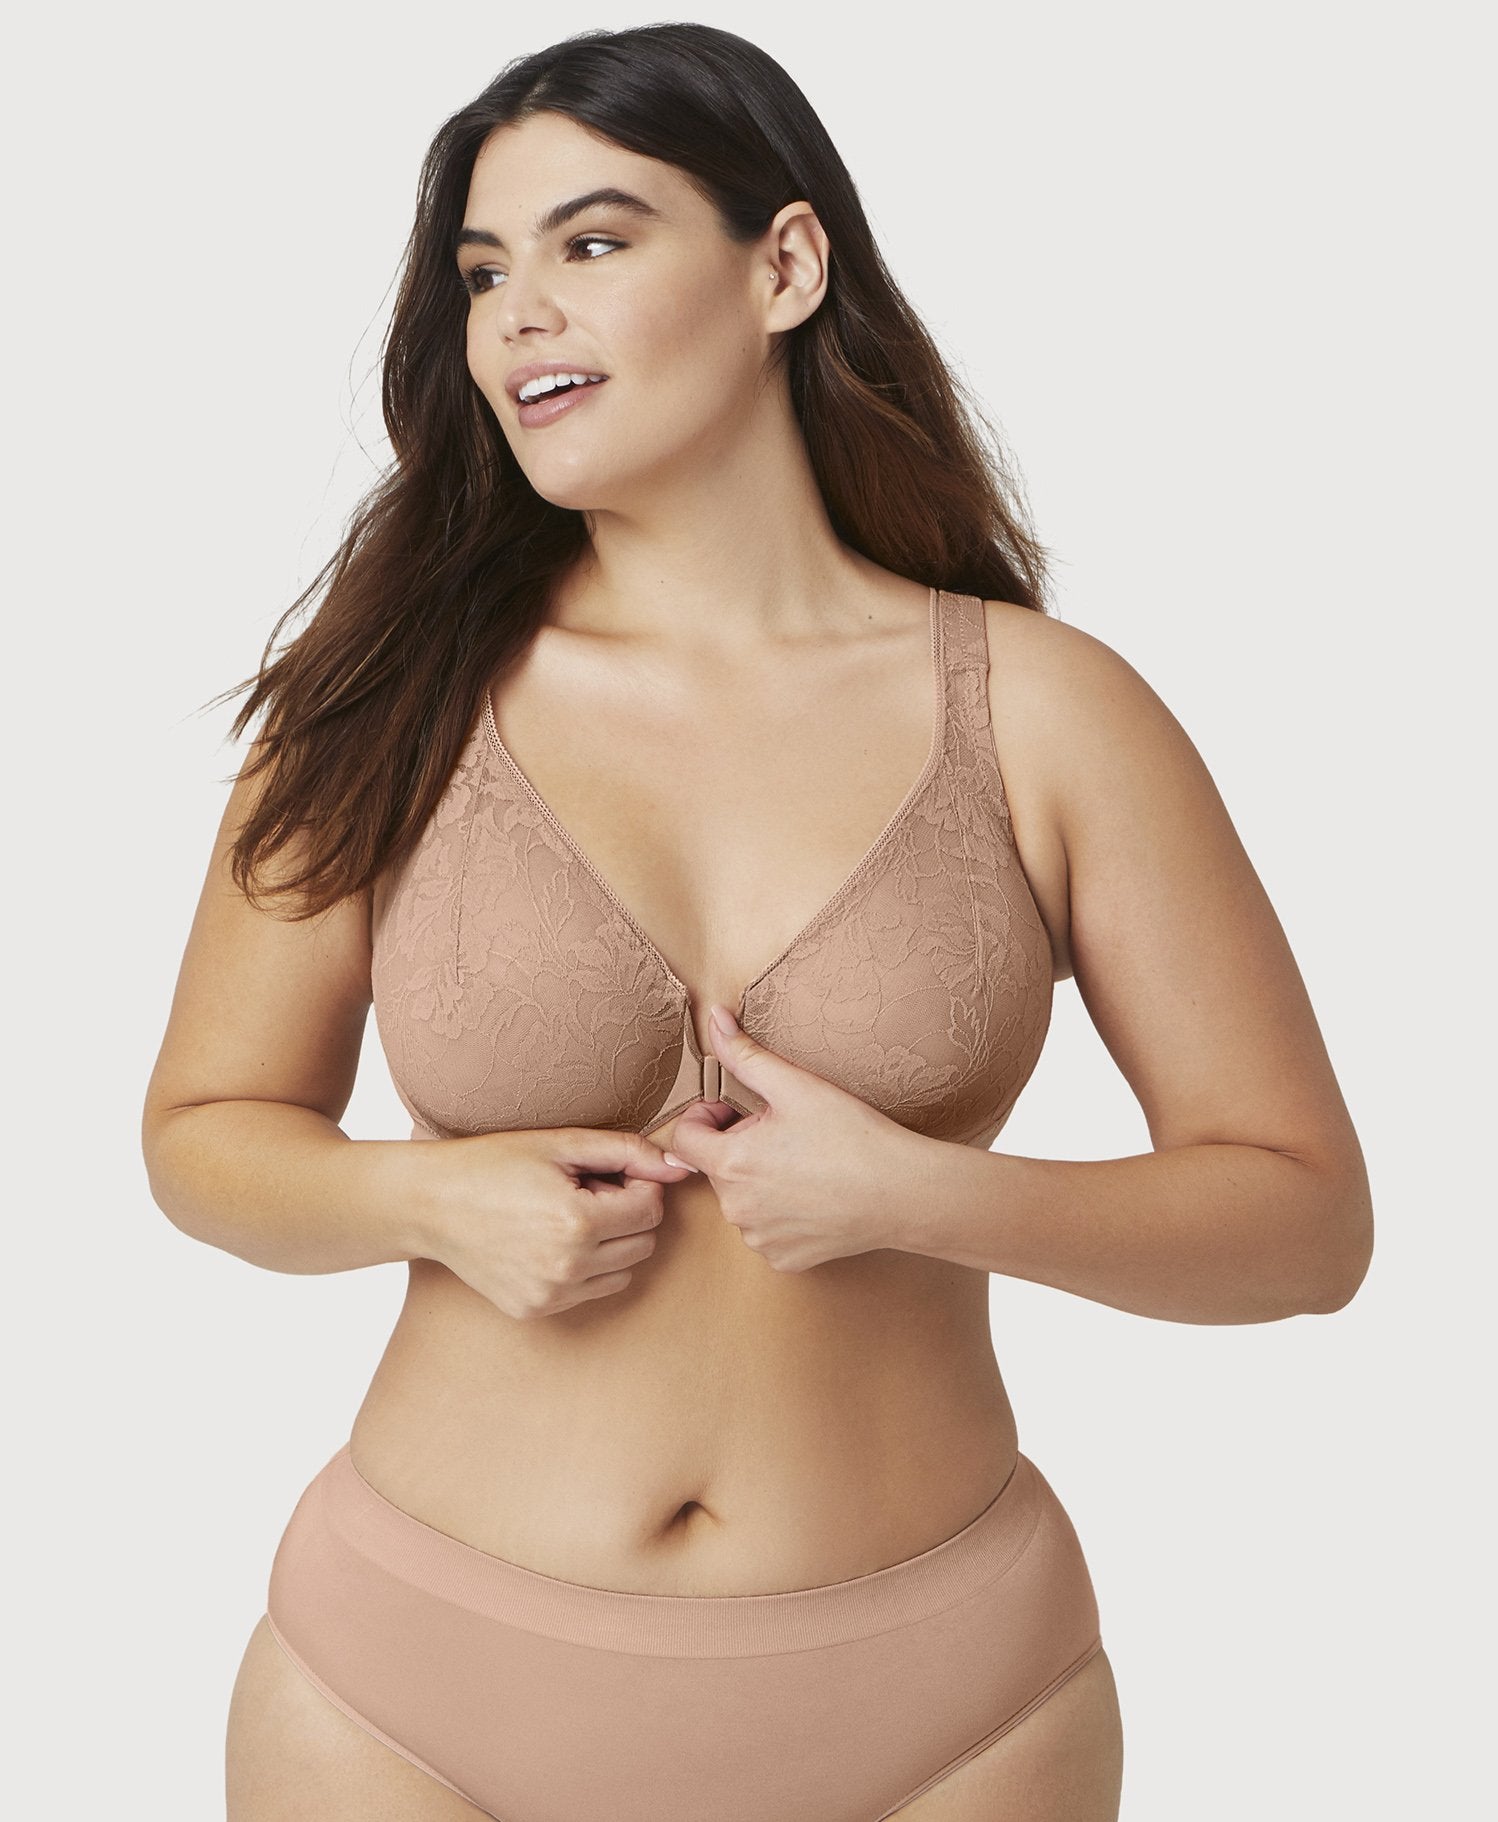 Wonderbra - NEW IN STORES Grab yourself a set of these 2 pack beauties!  Beautifully smooth cleavage bras and matching thongs are in selected  Foschini and Truworths stores now! Bra sizes: 34-36A /